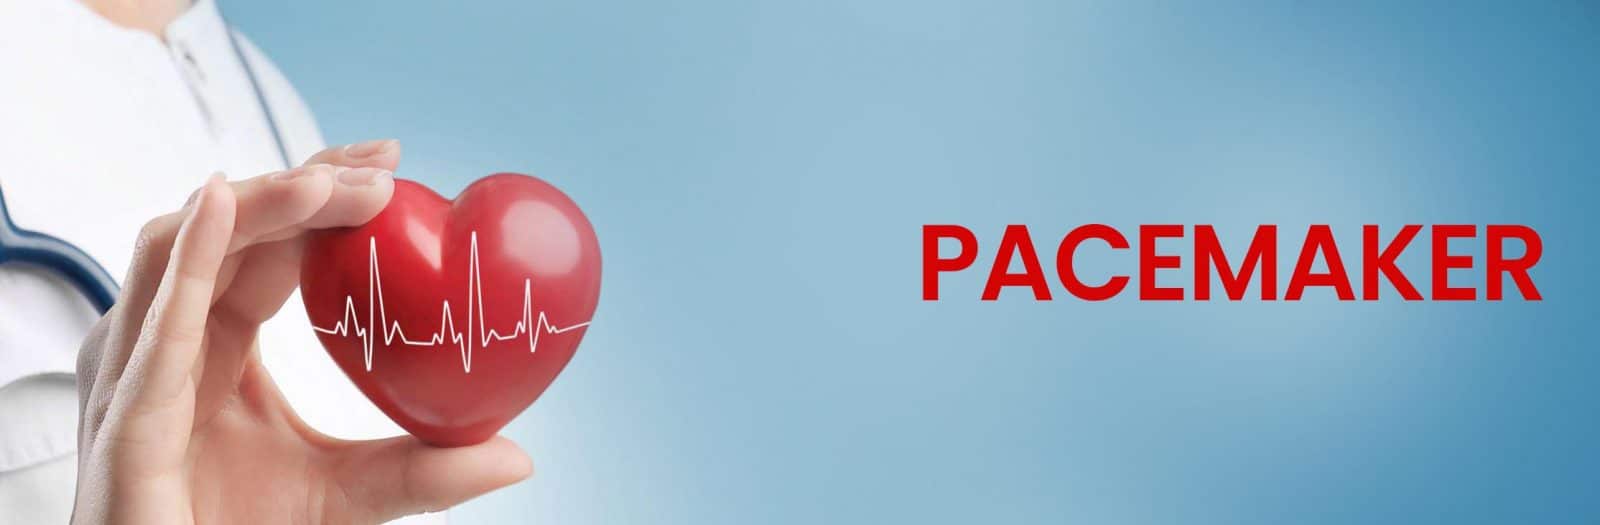 Best Pacemaker implantation in Indore